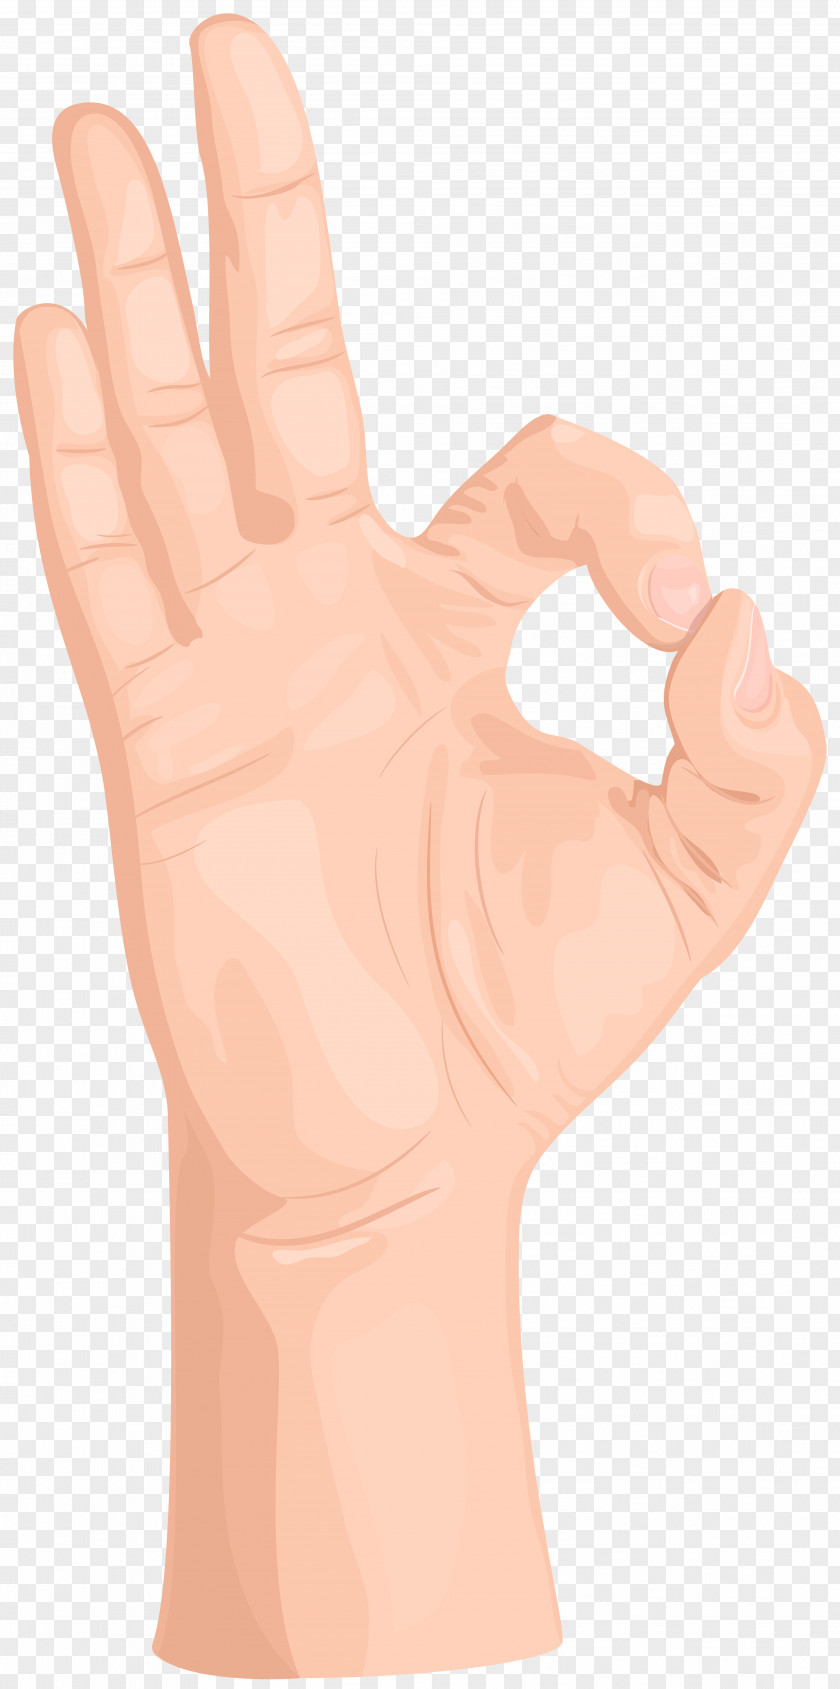 Ok Sign With Your Hand Adobe Photoshop Gesture Thumb Image PNG